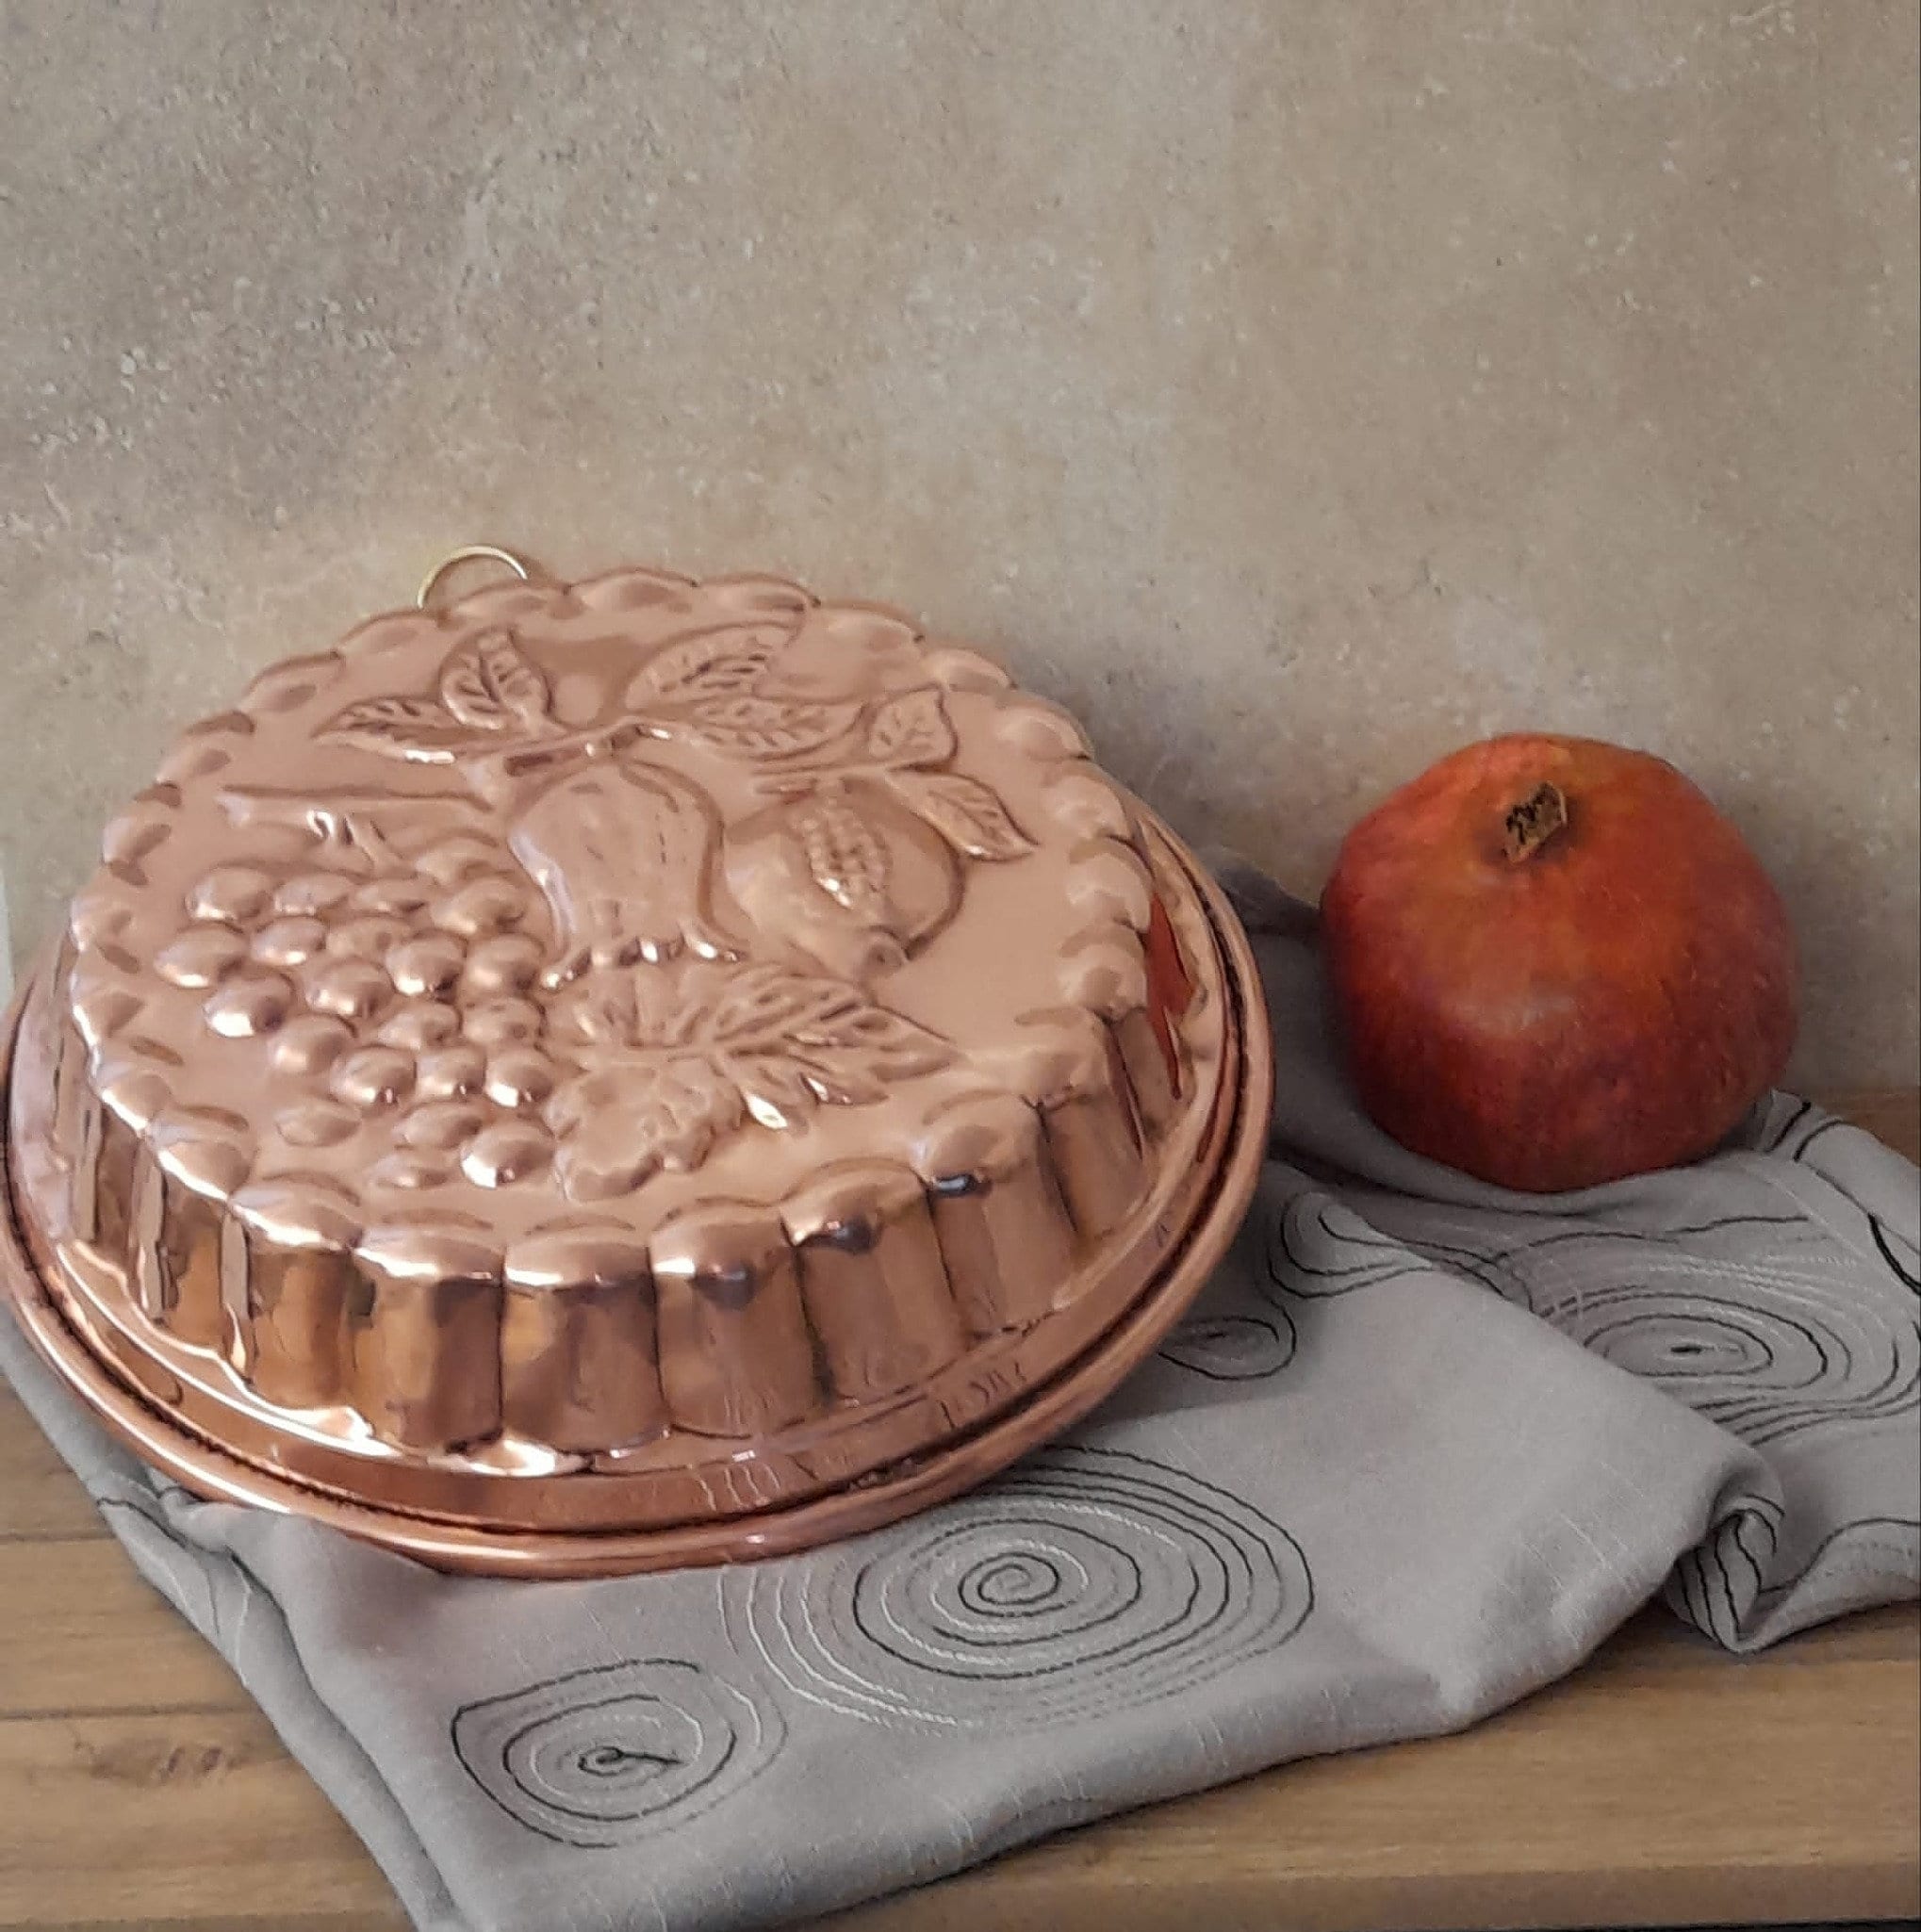 Copper Cooking Pan Authentic Italian Risotto Pan 11 Inches Tin Lined  Handmade Hammered Made in Italy Retro-style Gift Idea for Grandmother 